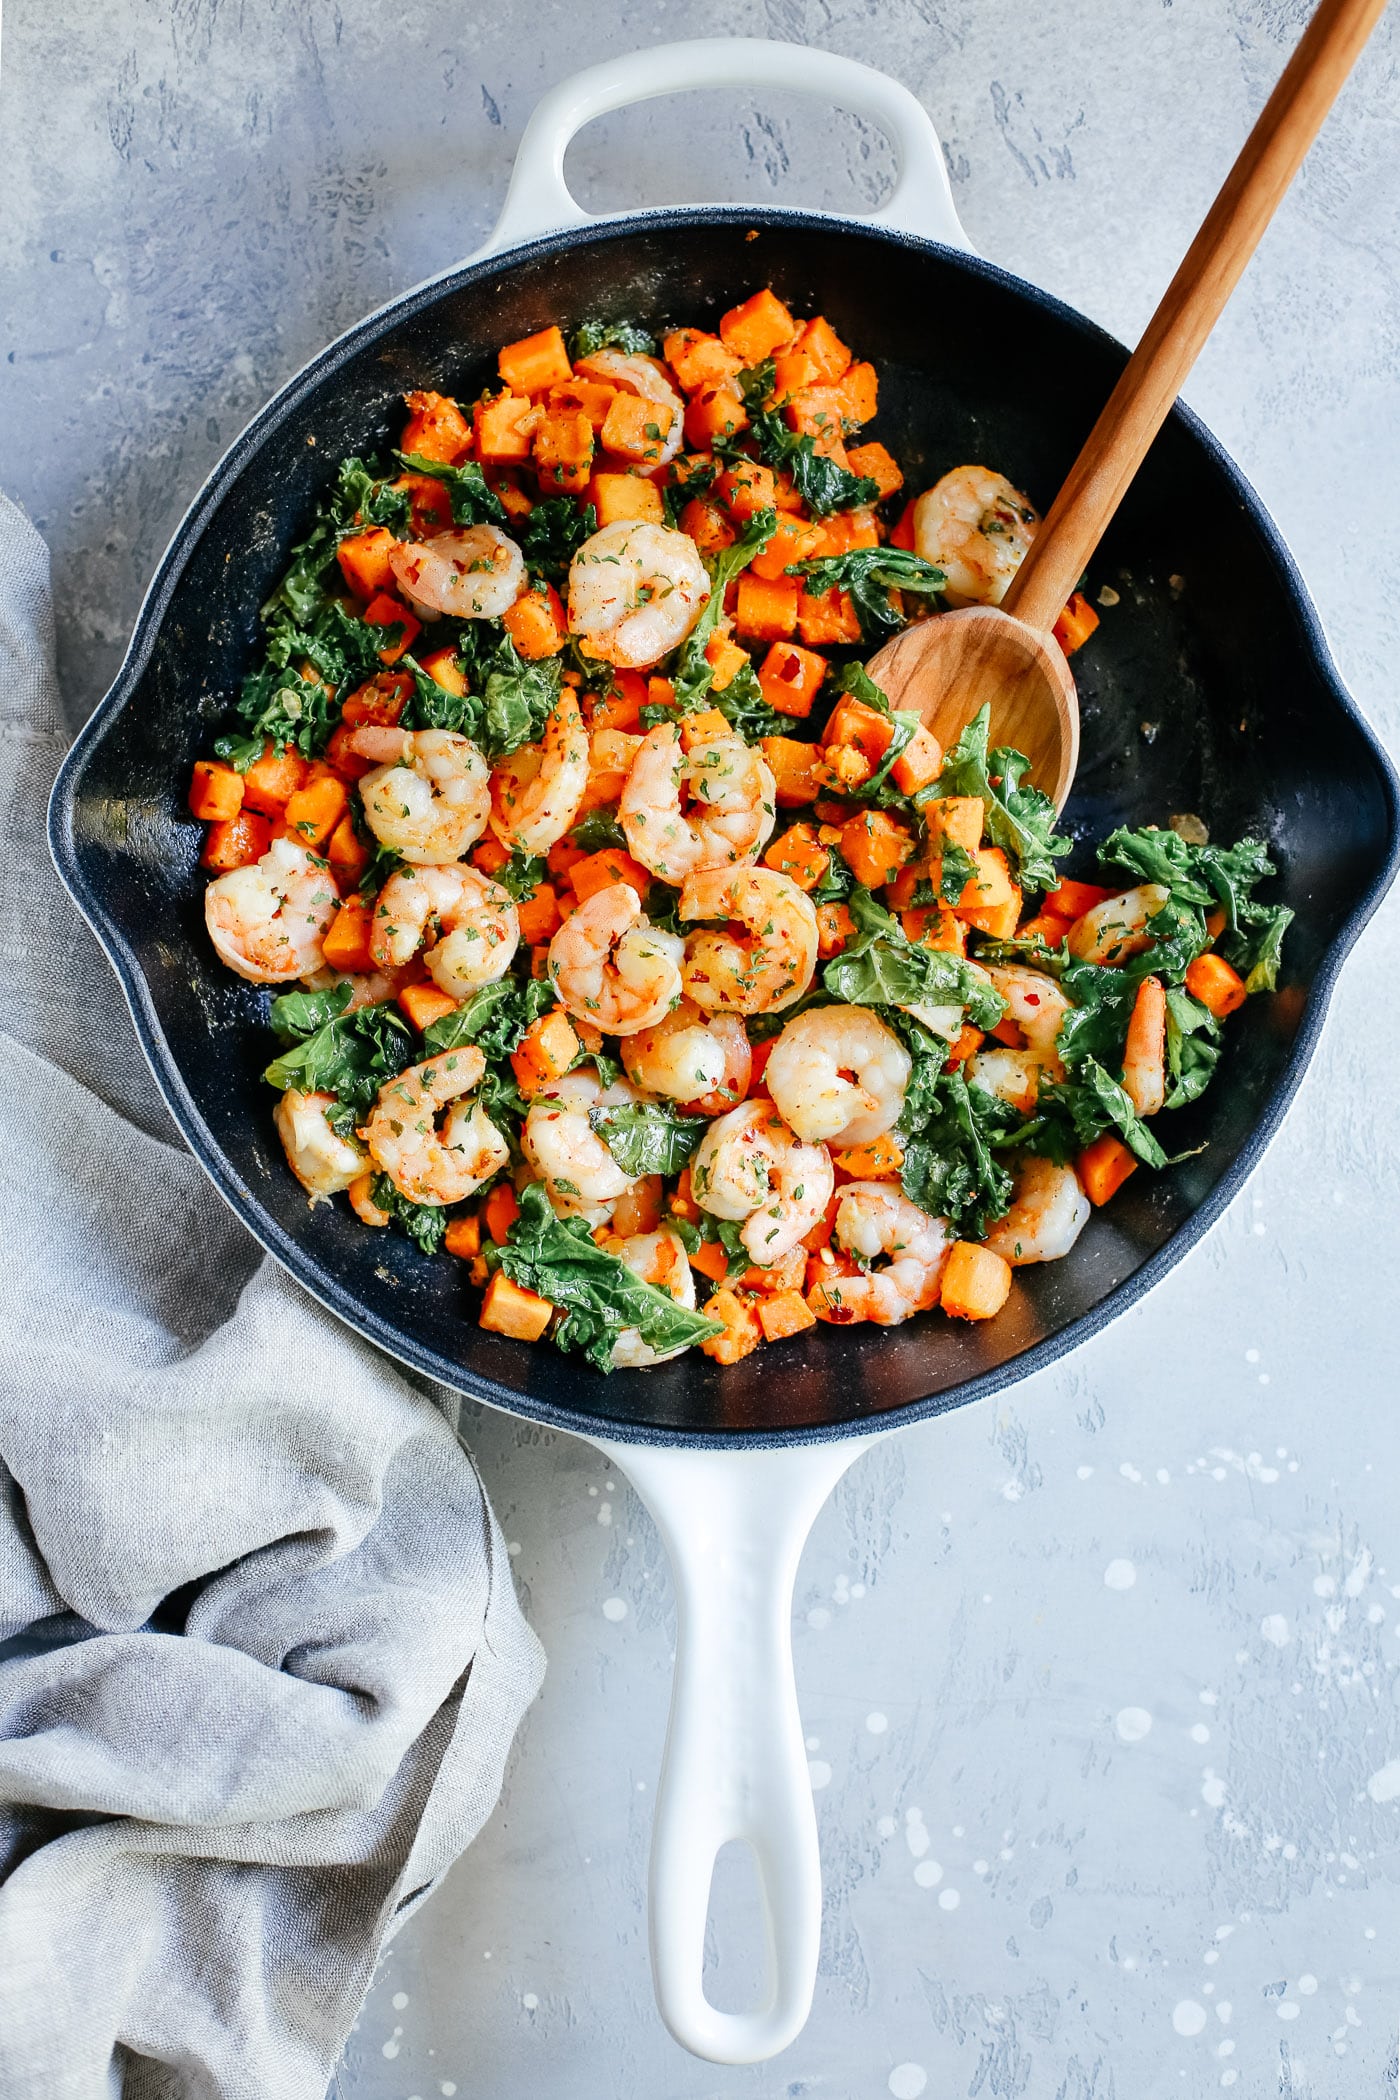 Shrimp Dinner Recipes - A white skillet with shrimp, kale, and sweet potatoes with a spoon inside.